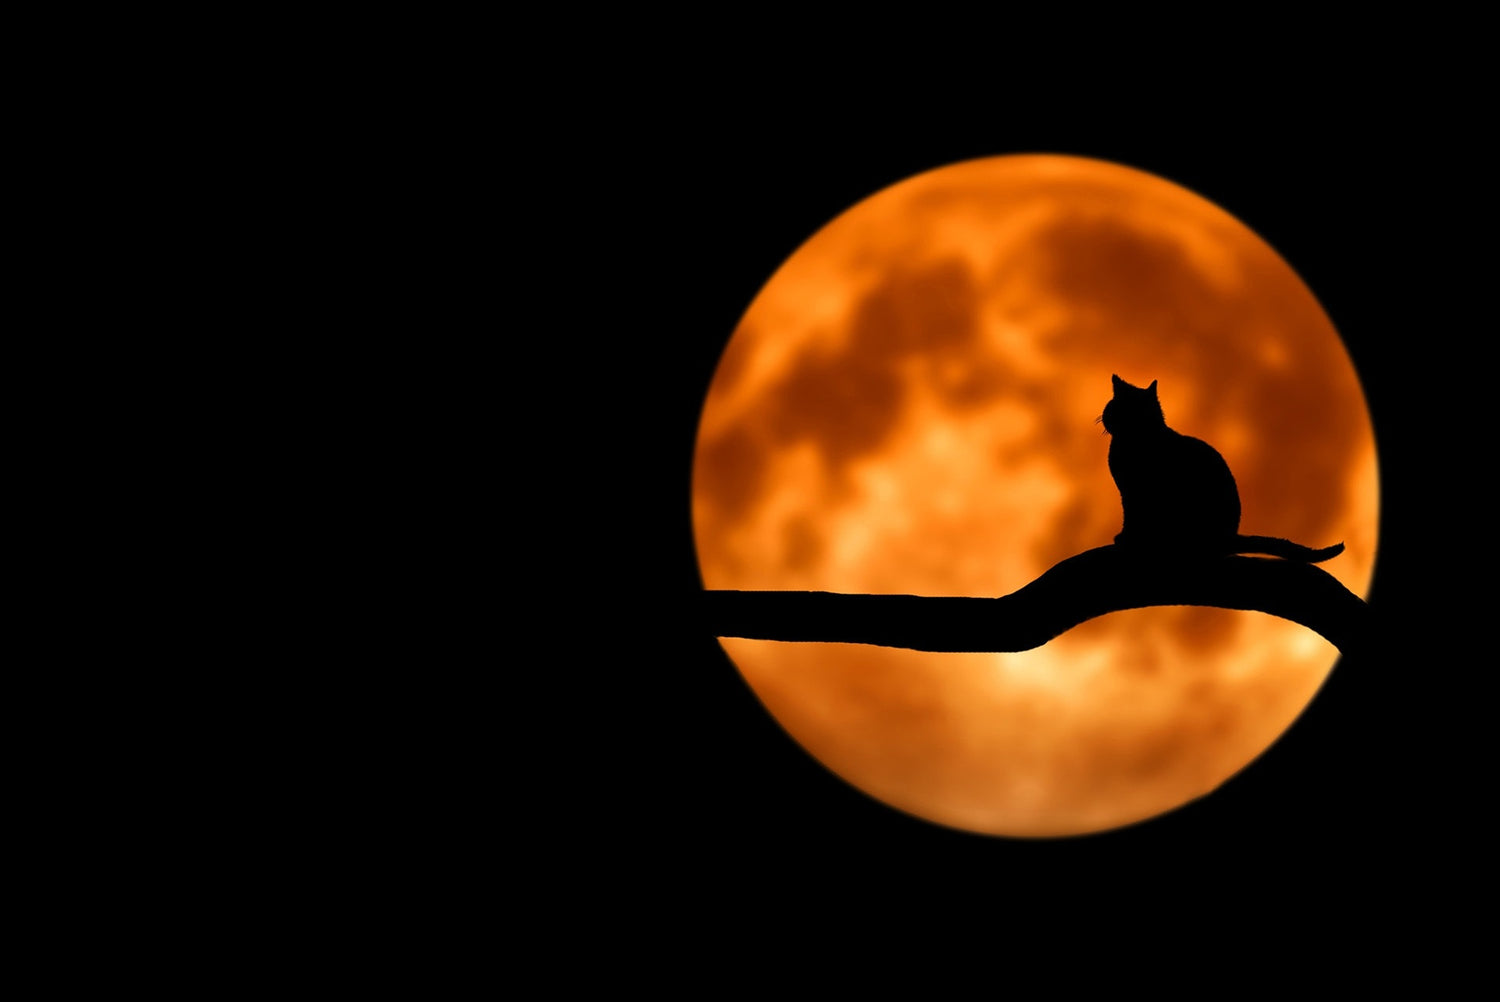 A beautiful picture of a black cat against the red moon for a perfect black background on a Halloween style store products and banners to celebrate and enjoy Halloween or other holidays 